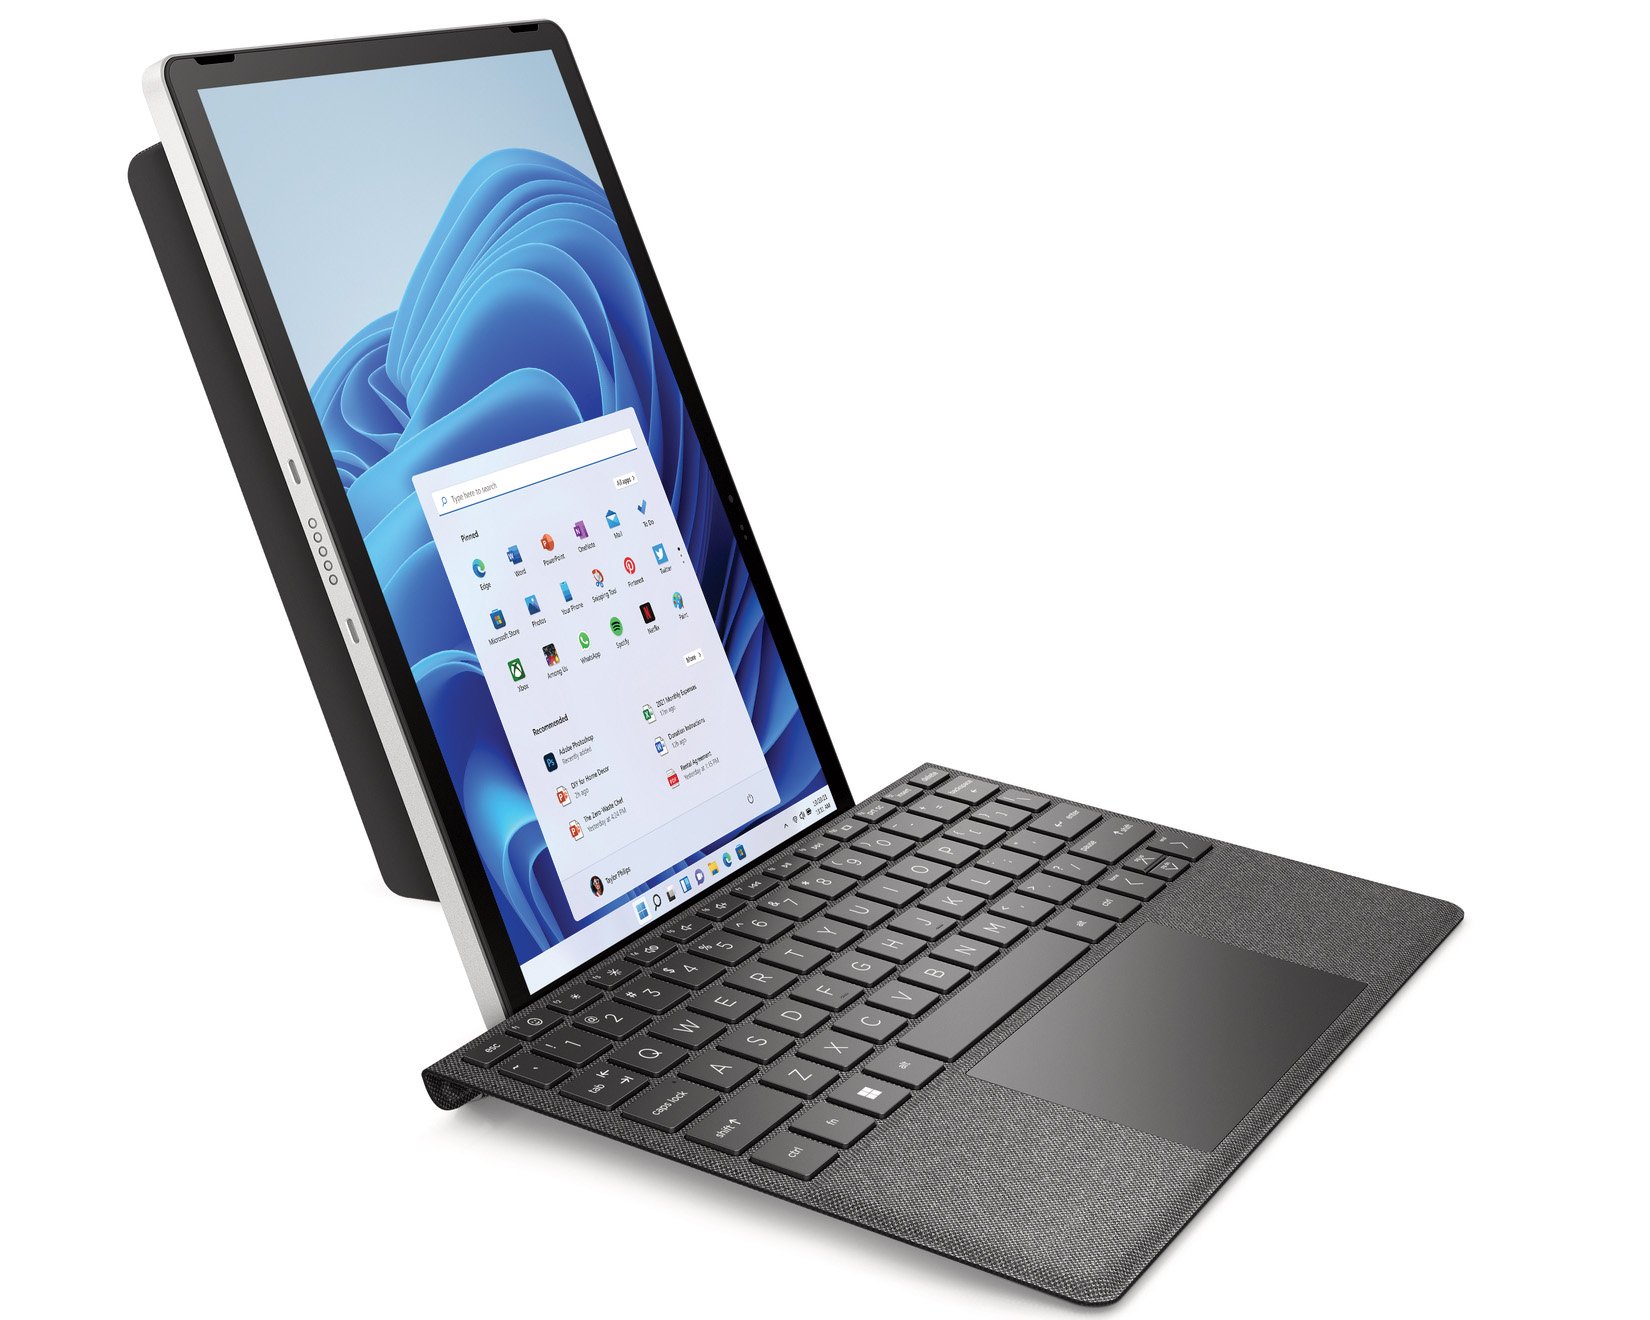 The new HP 11-inch Tablet PC goes vertical and has a massive 13MP